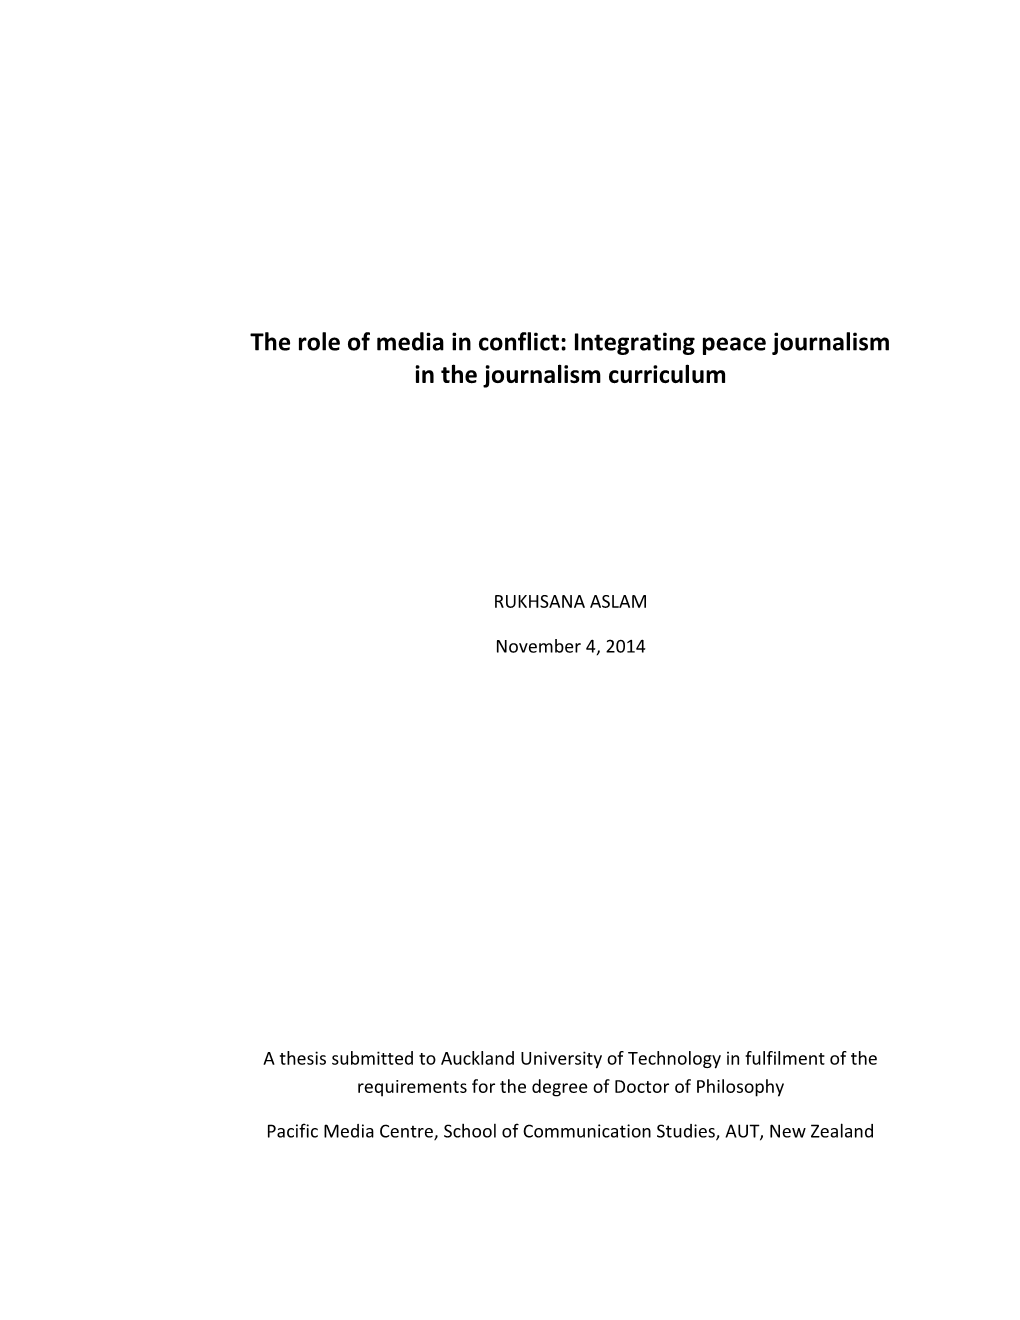 The Role of Media in Conflict: Integrating Peace Journalism in the Journalism Curriculum